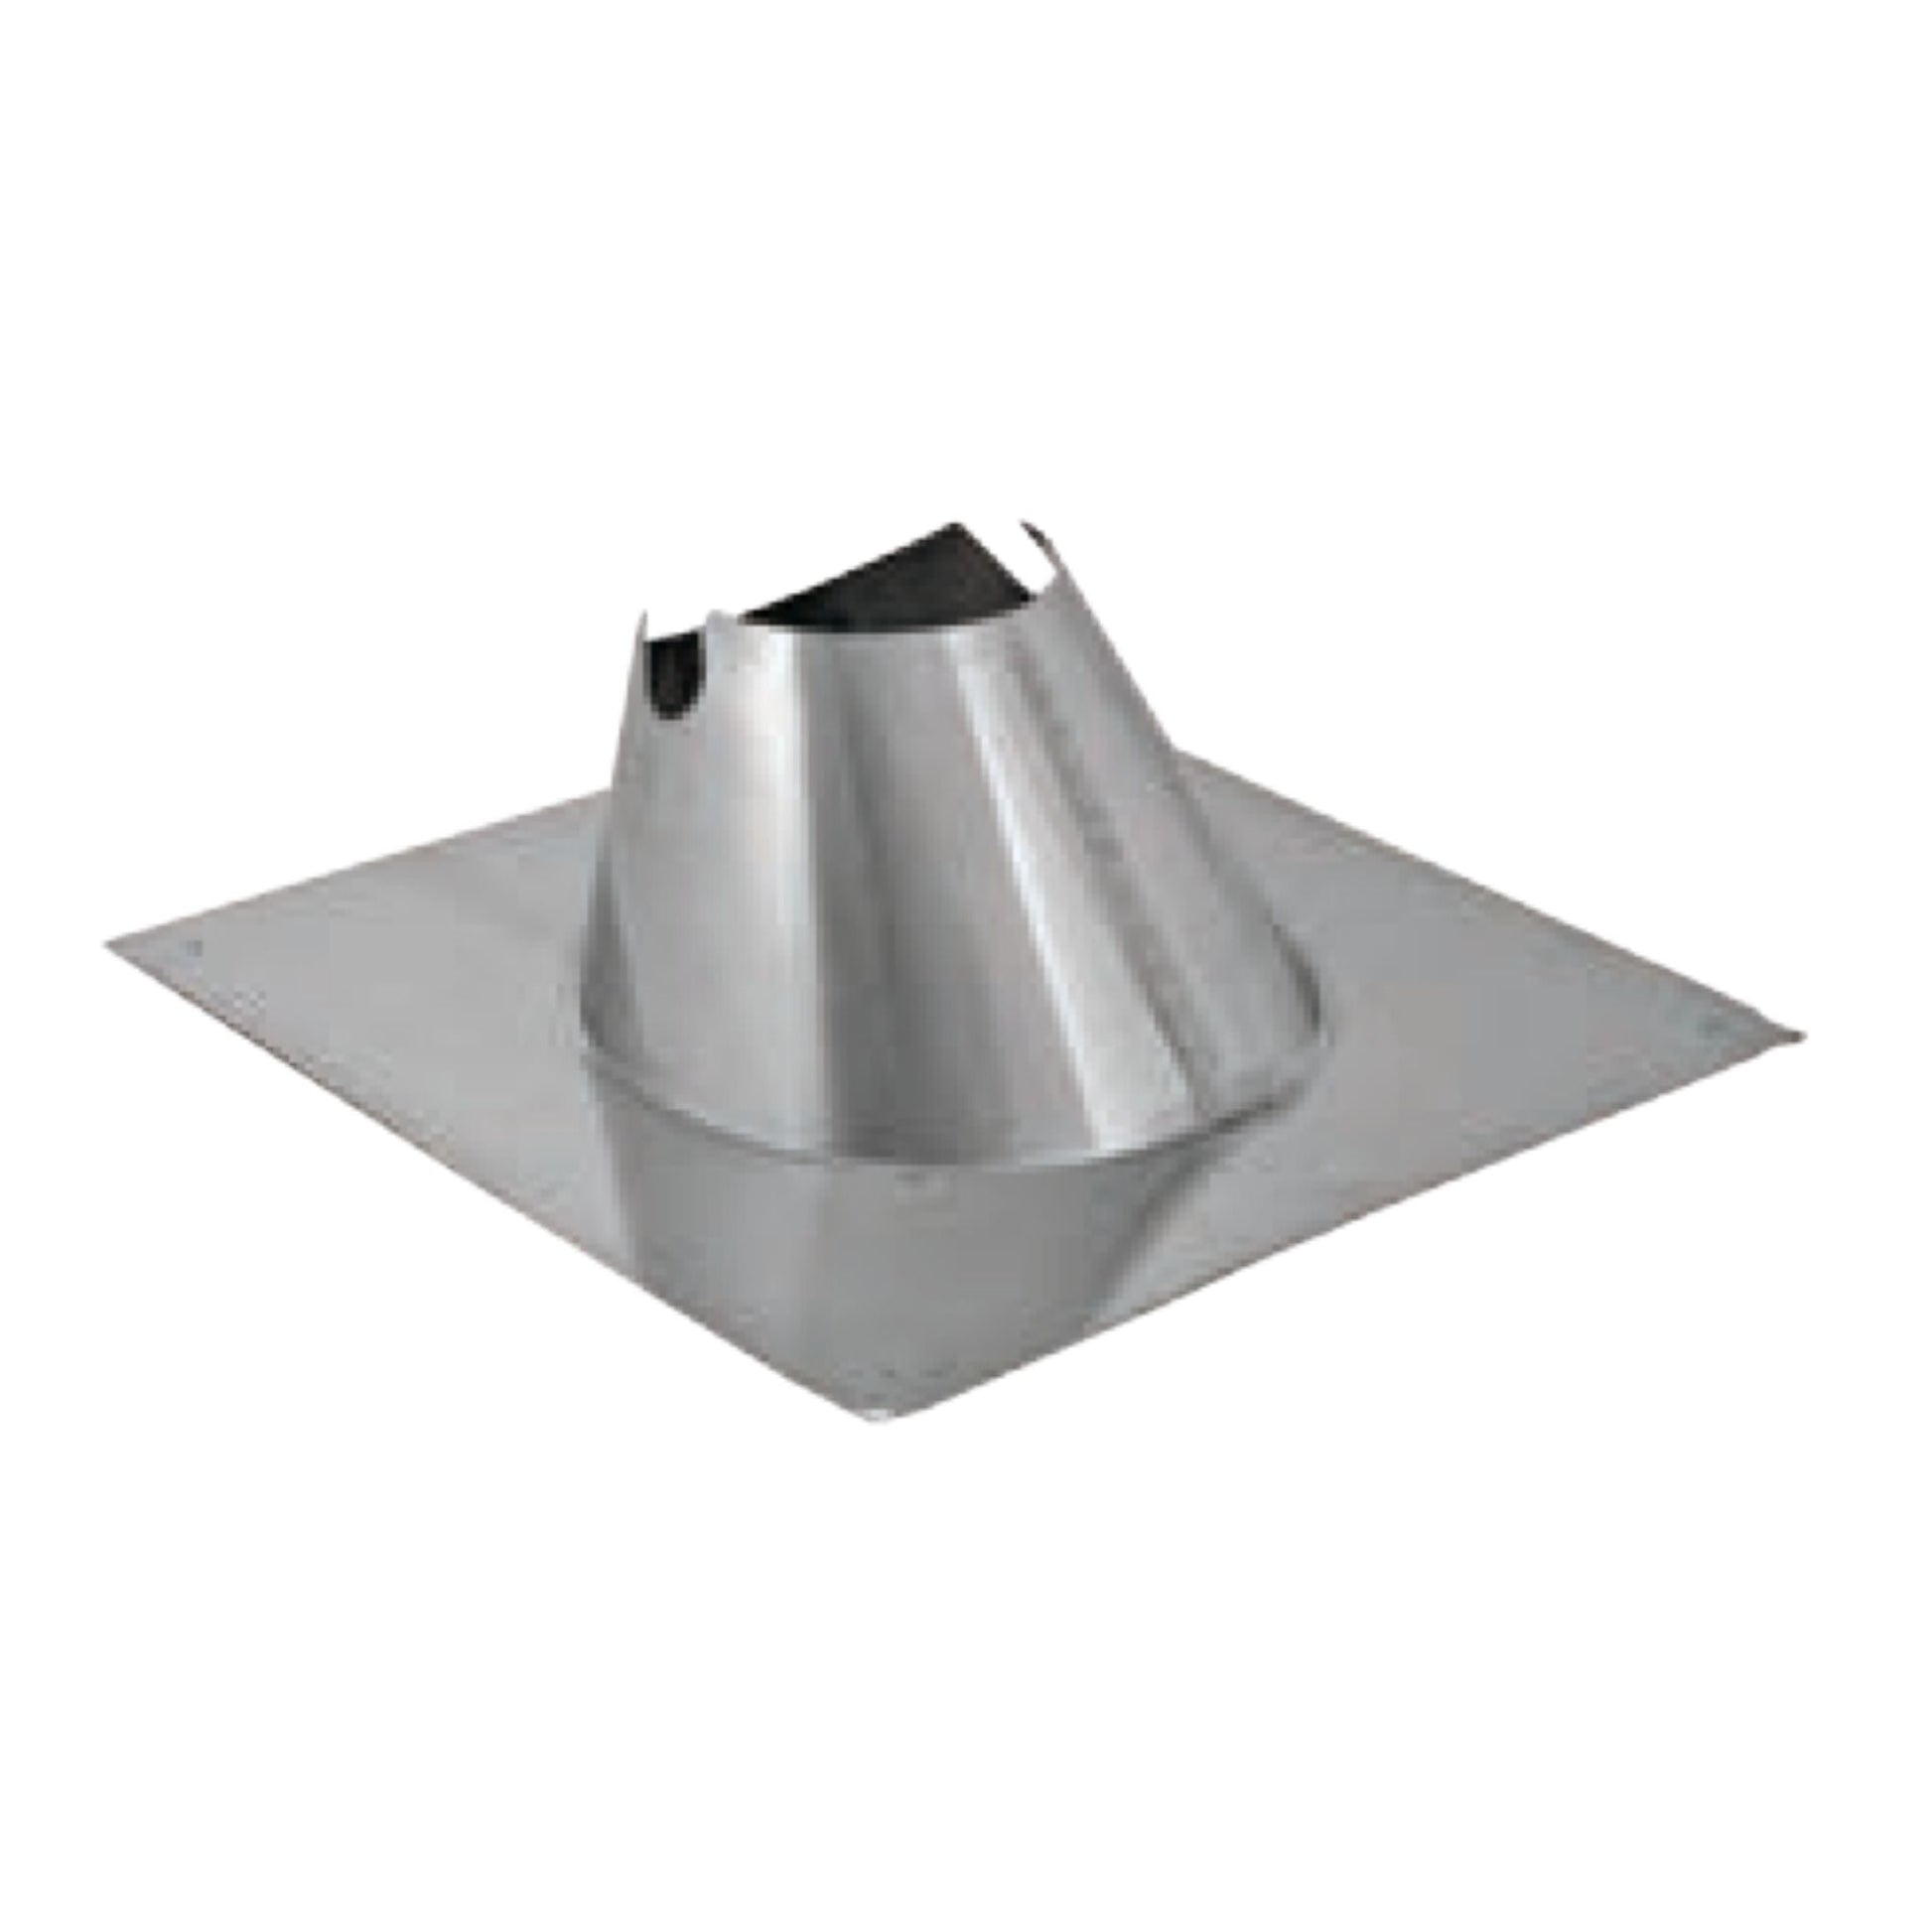 DuraVent FasNSeal 14" 29-4C Stainless Steel Variable Pitch Roof Flashing